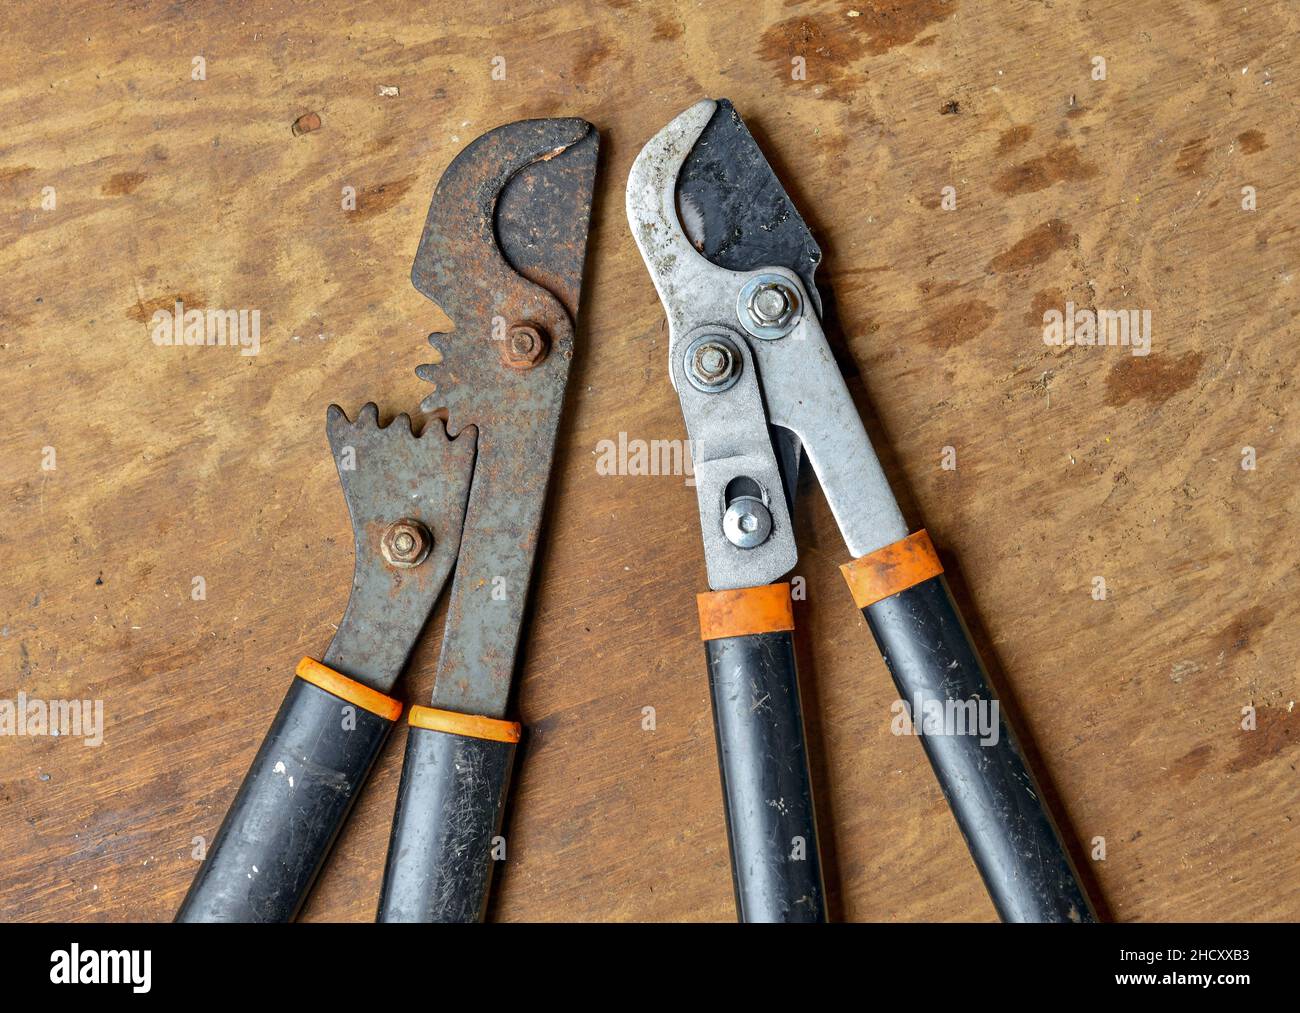 Vintage tools and handles with wood background Stock Photo